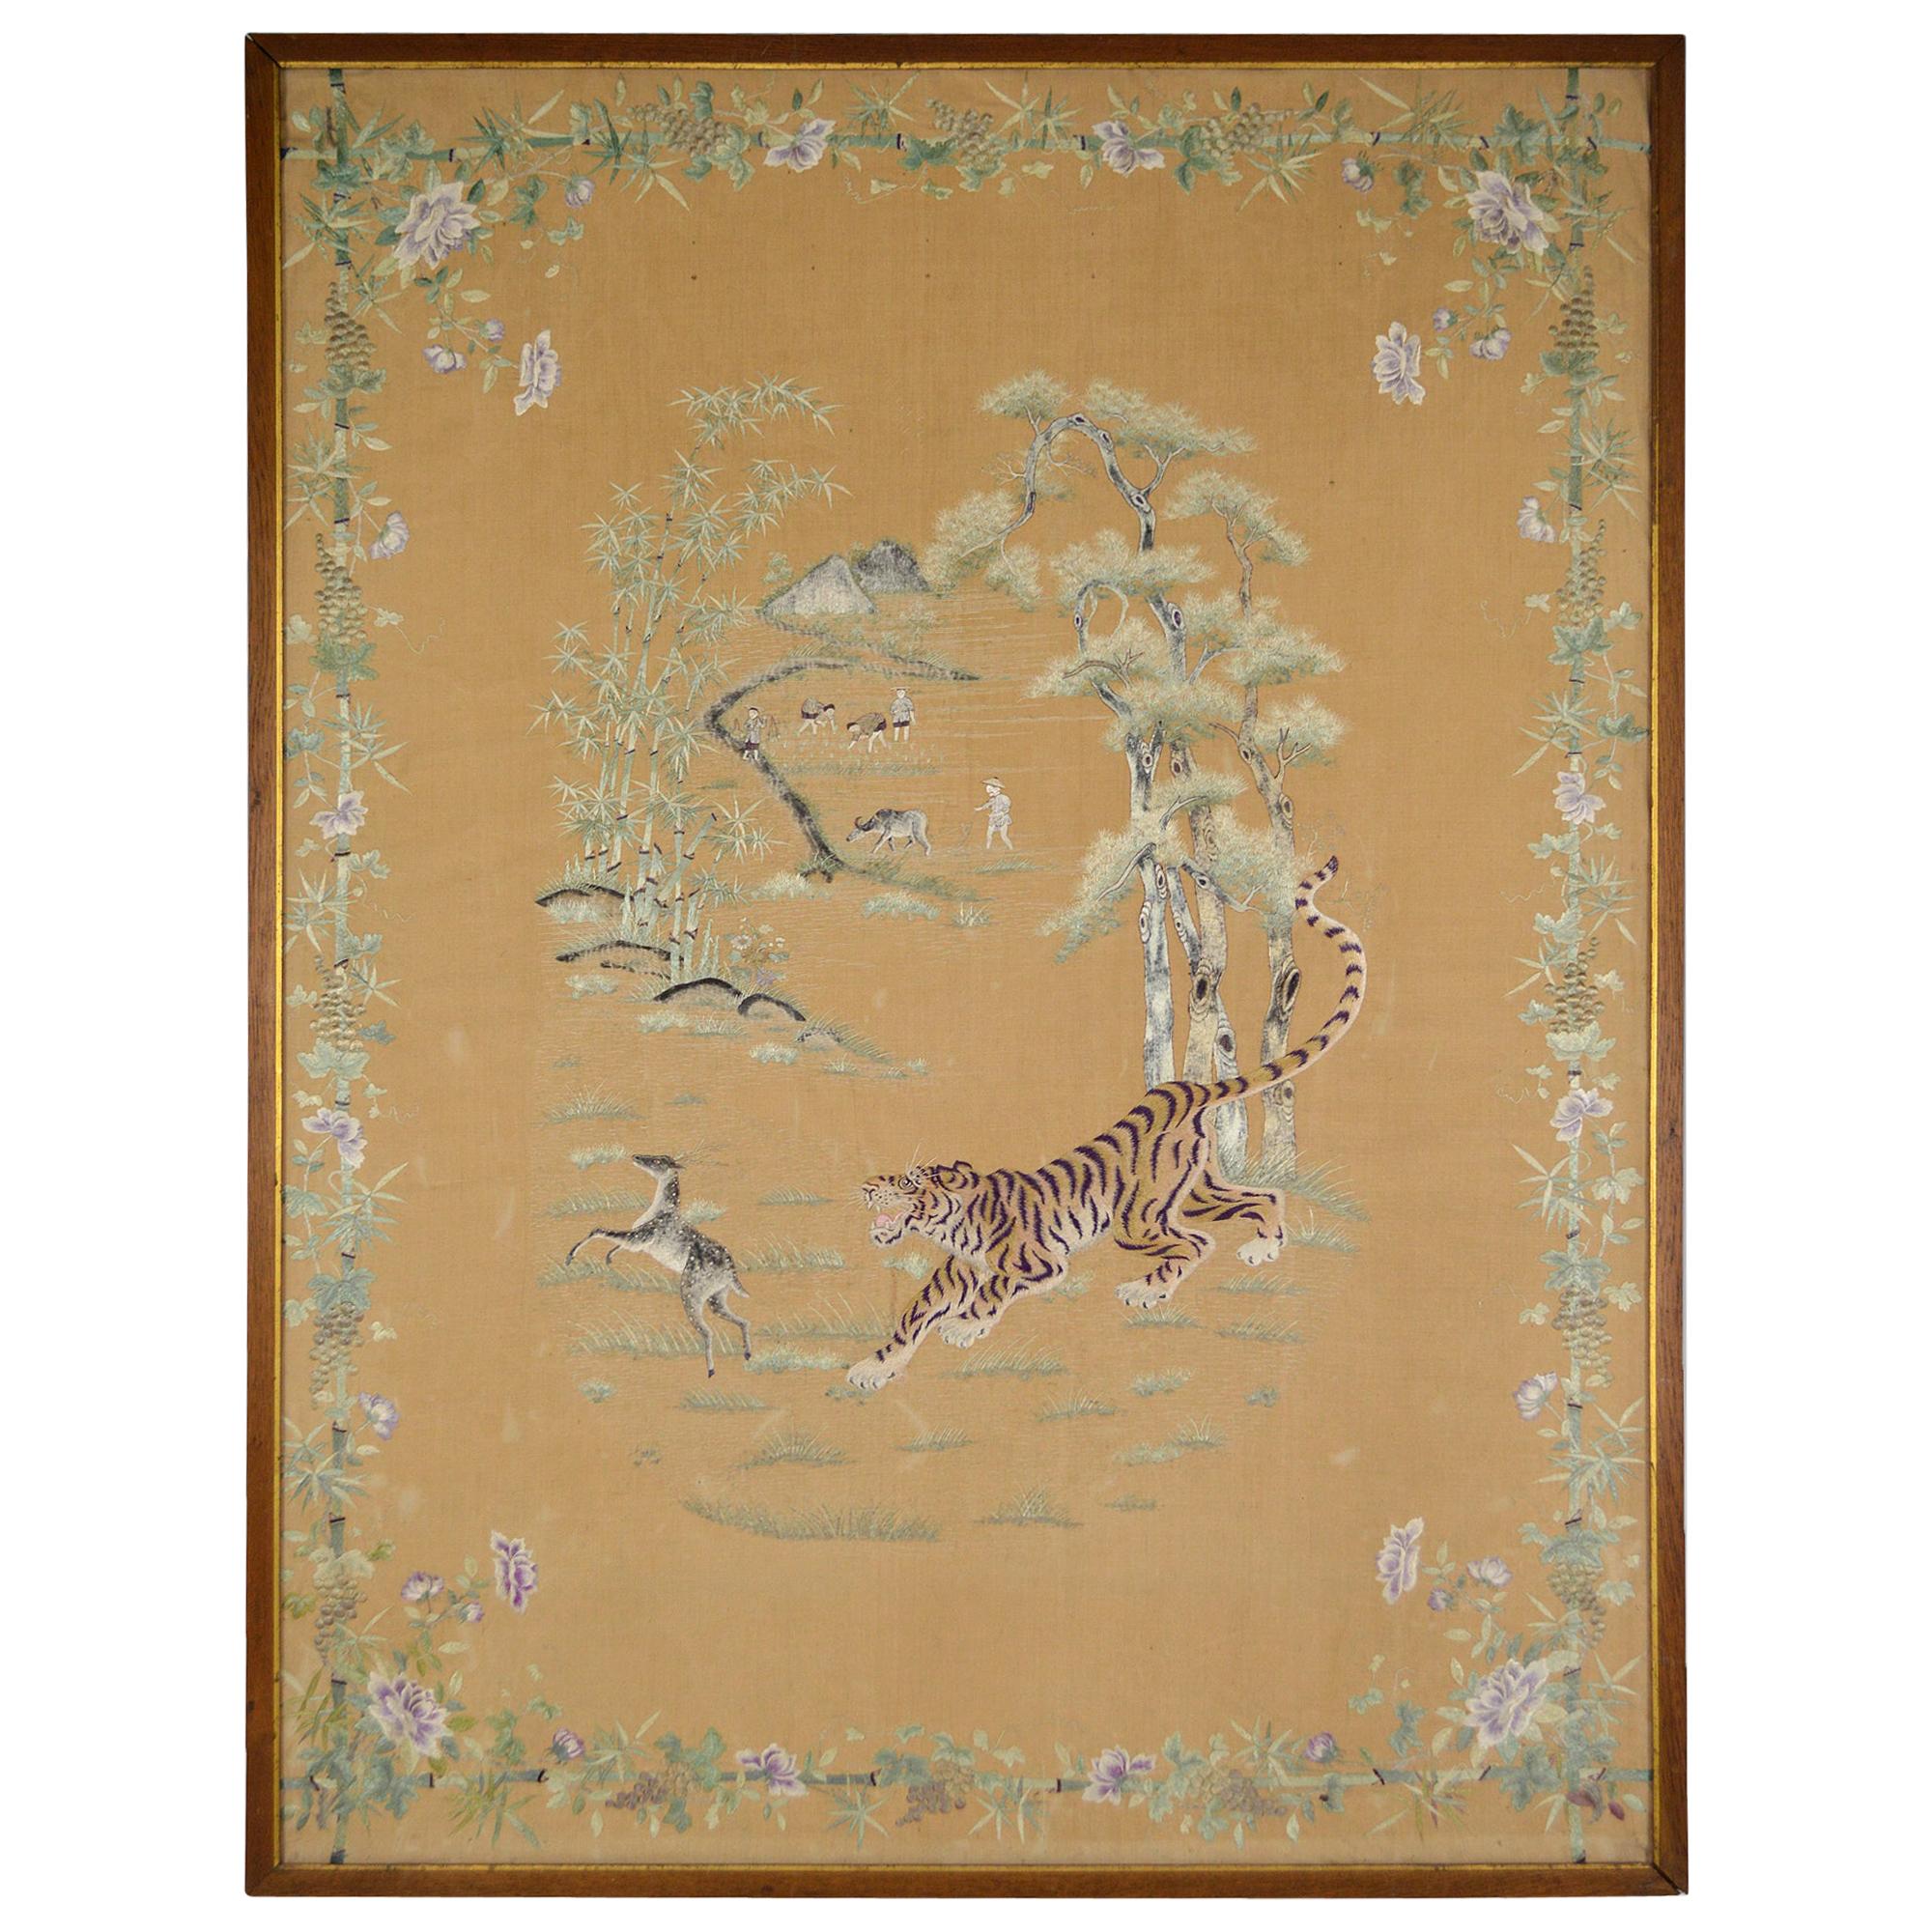 Large Asian Silk Embroidery Tapestry, "Tiger Hunting Deer", Indochina circa 1890 For Sale